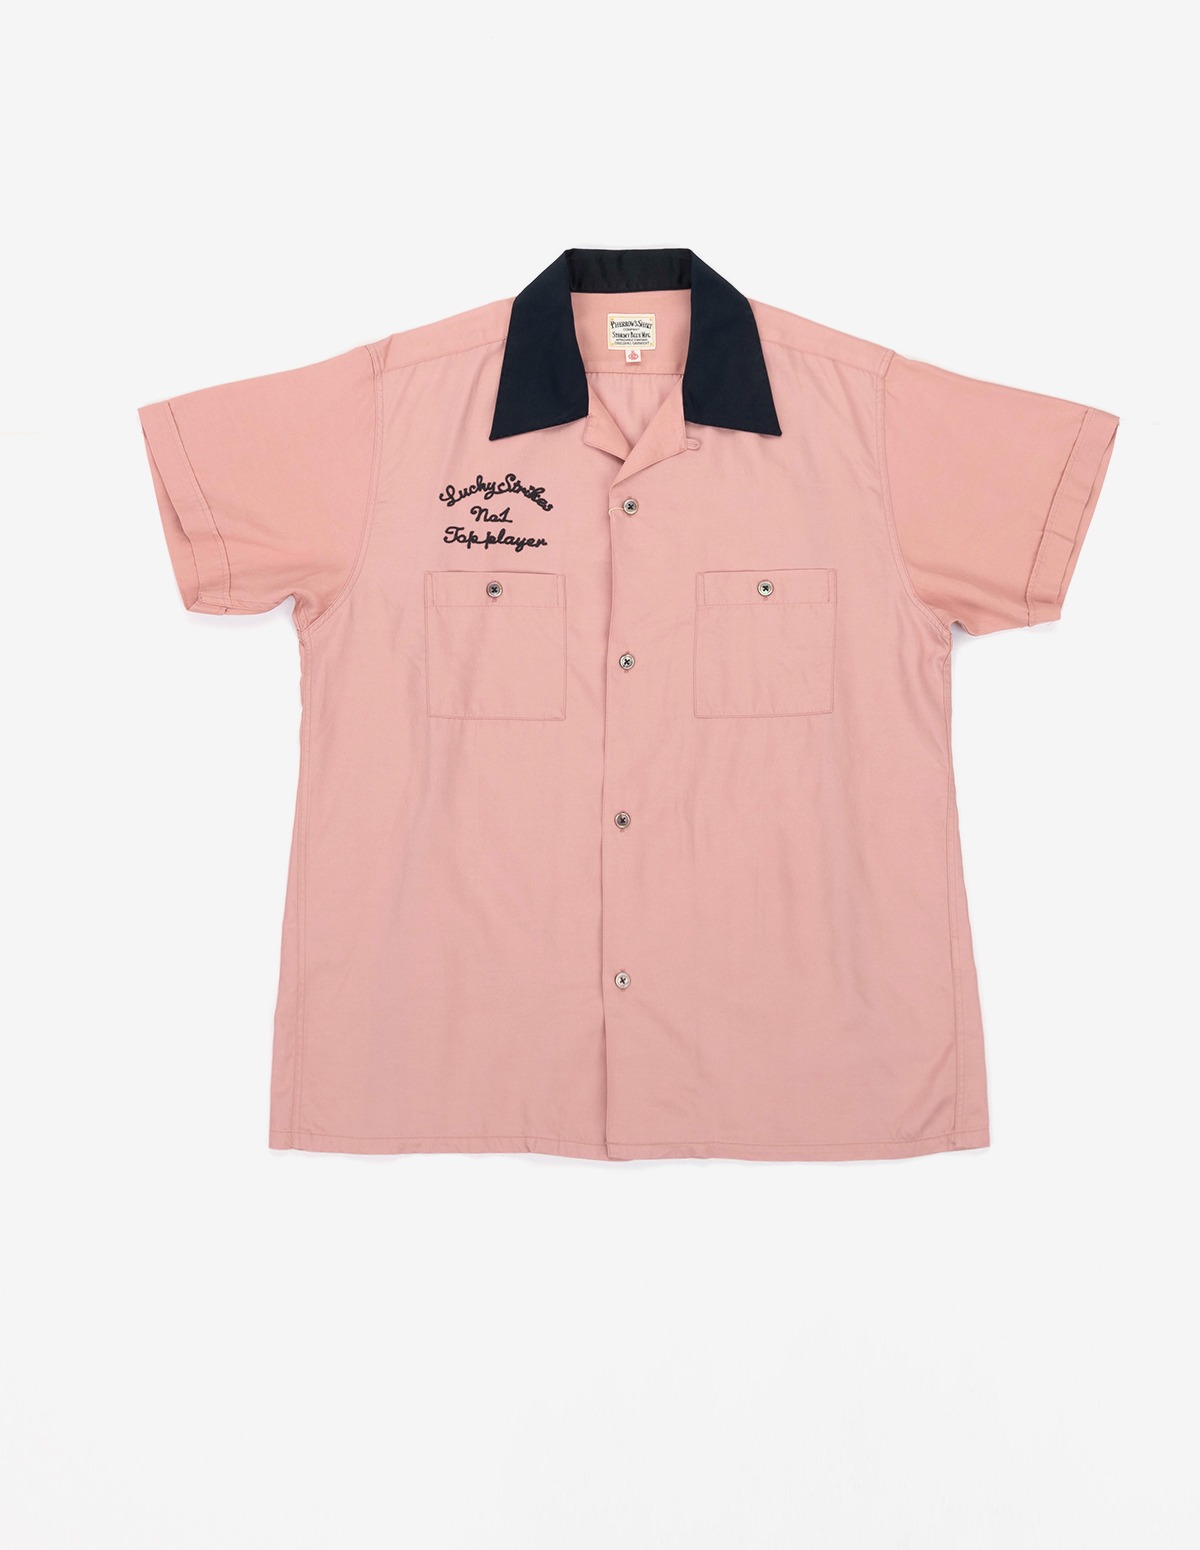 23S-PBS1 Lucky Strikes Bowling Shirts (Pink)